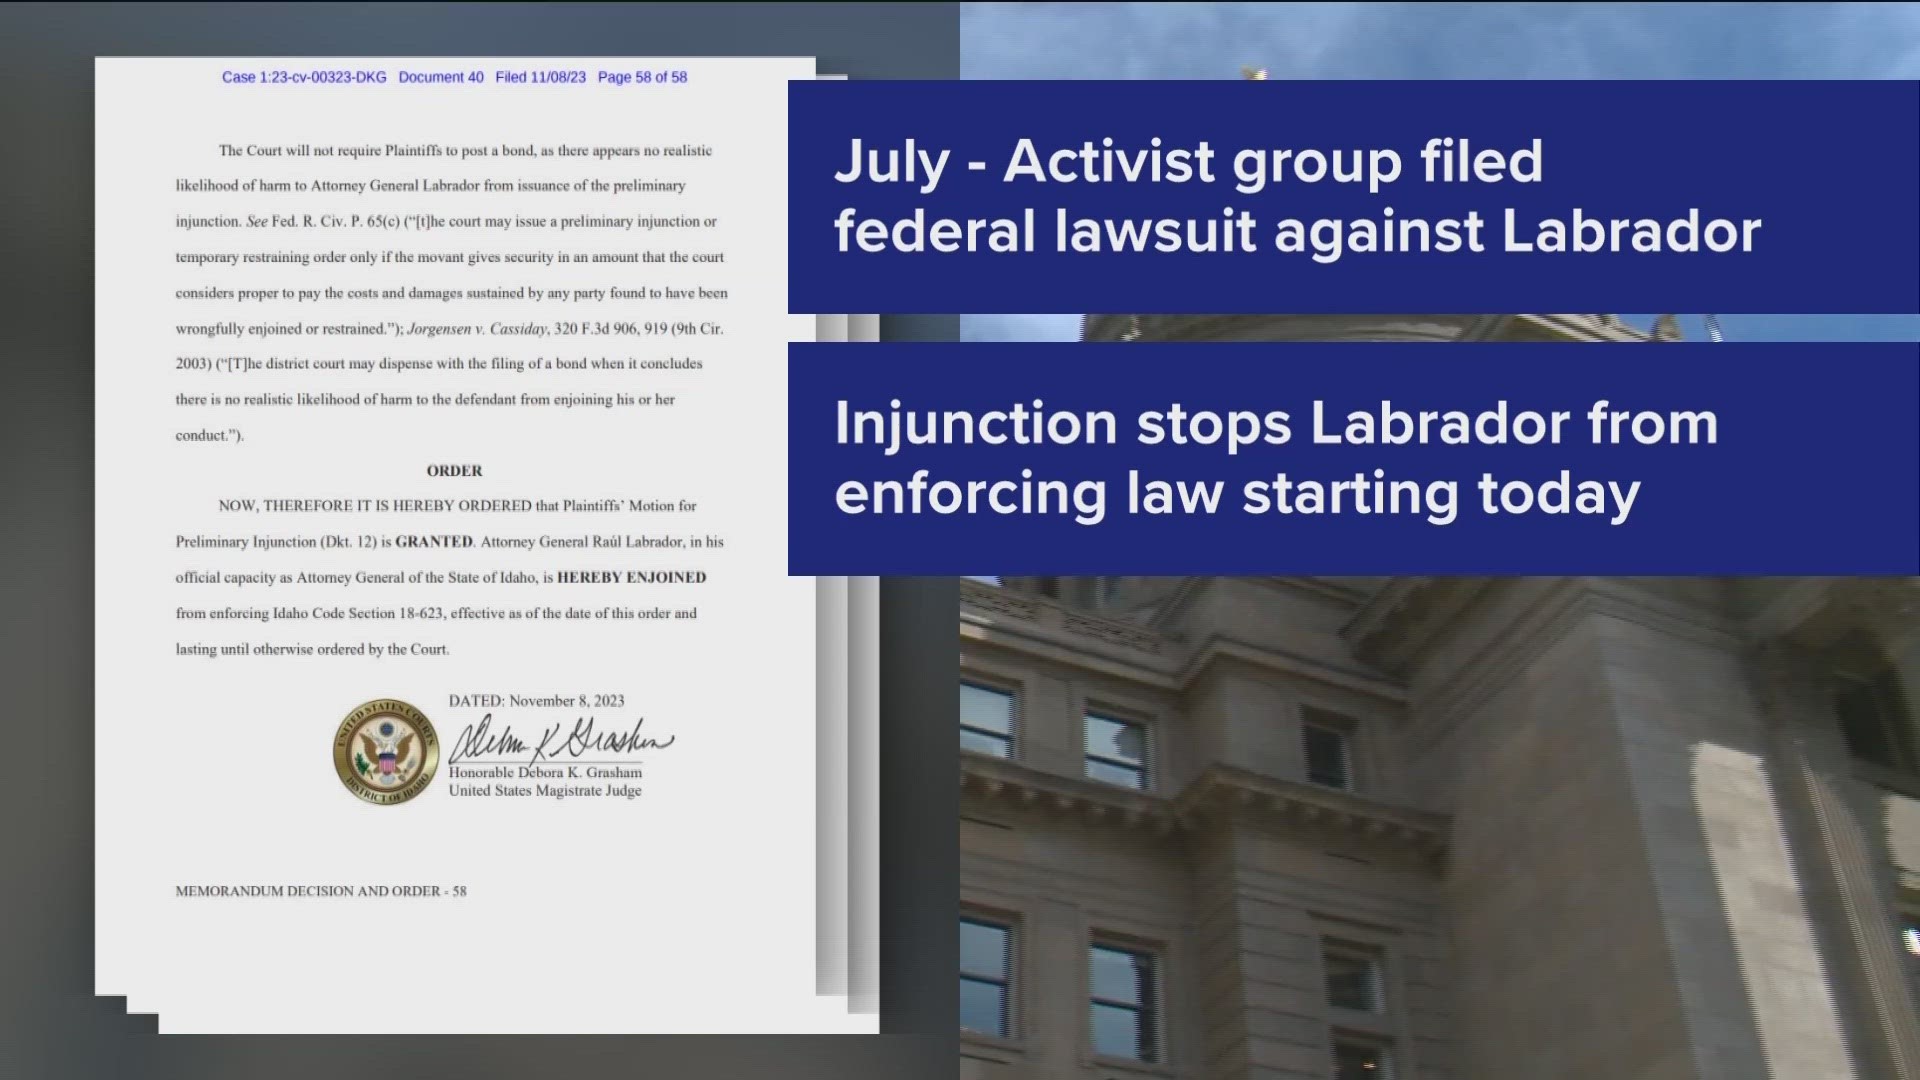 The preliminary injunction stops Attorney General Raul Labrador from enforcing the law starting Nov. 8.